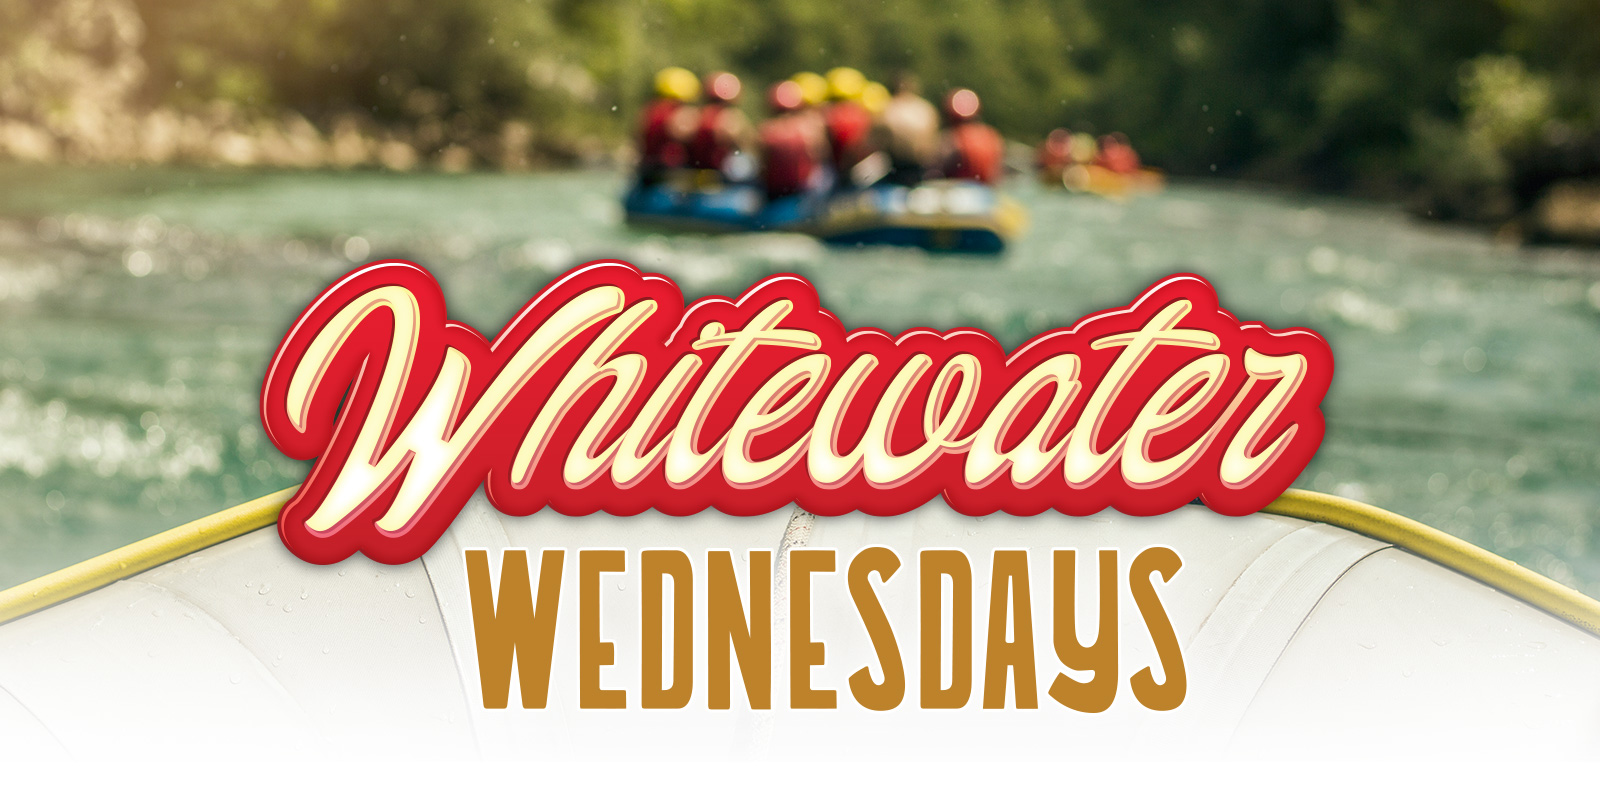 White Water Wednesdays! Score a White Water Rafting Trip in Maine